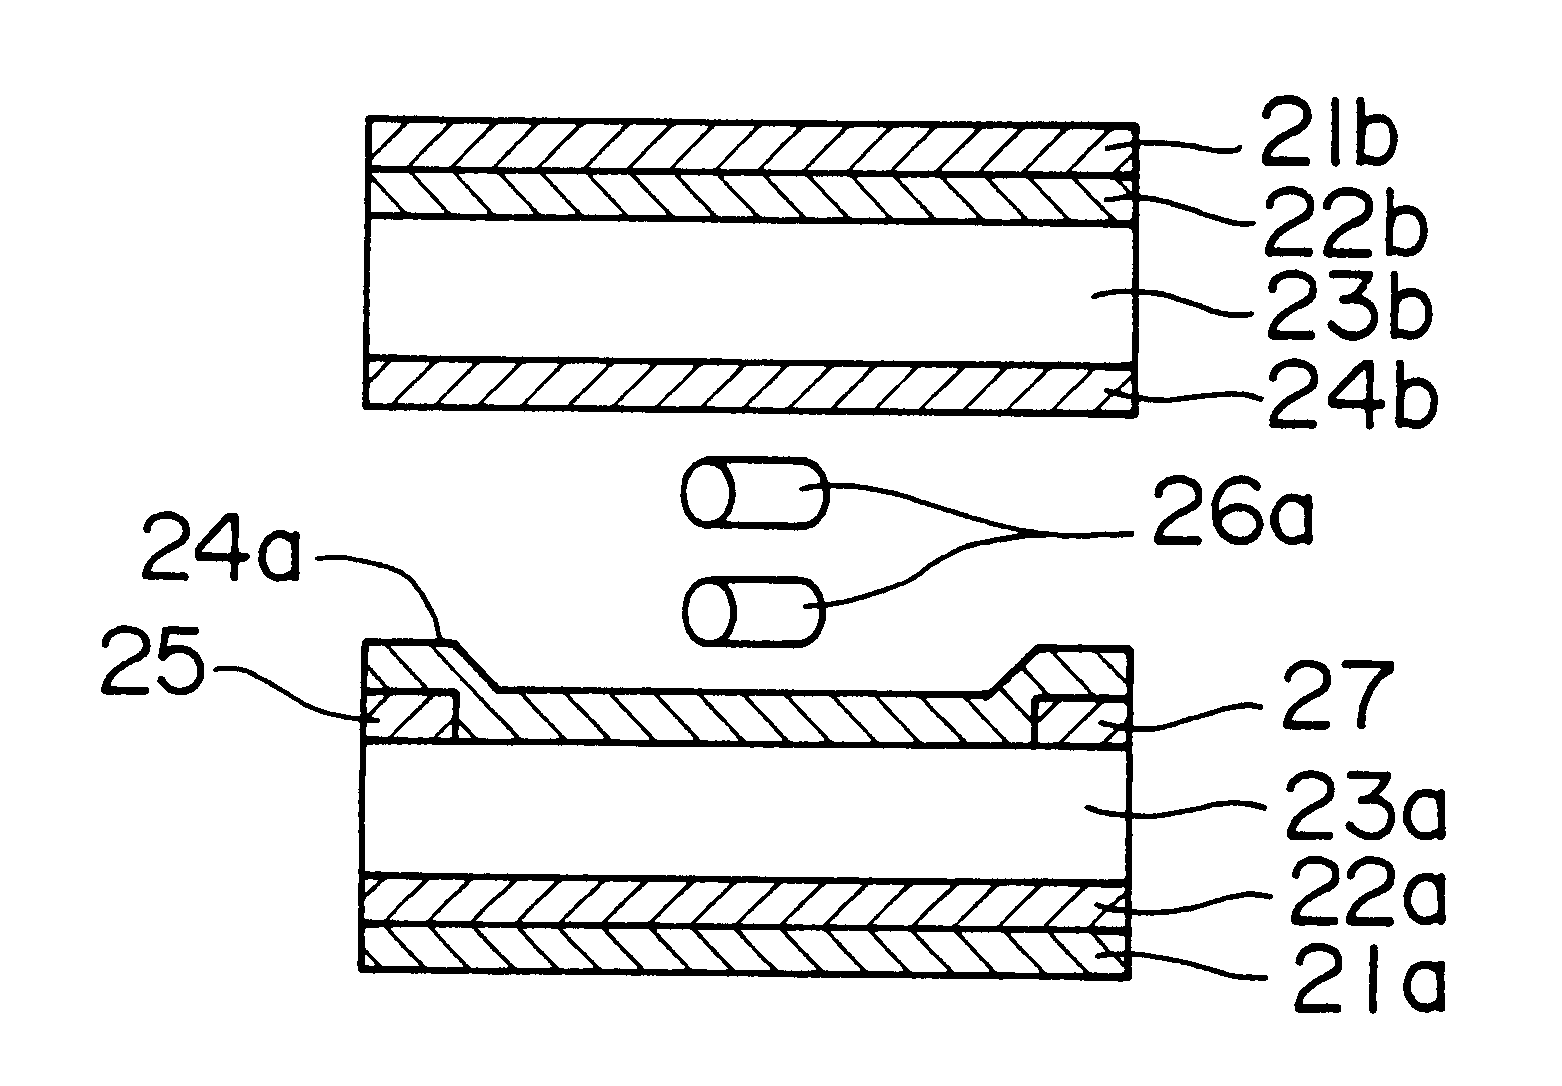 Liquid crystal display having optical compensatory sheet with negative uniaxial property and an optical axis parallel to the plane of the sheet